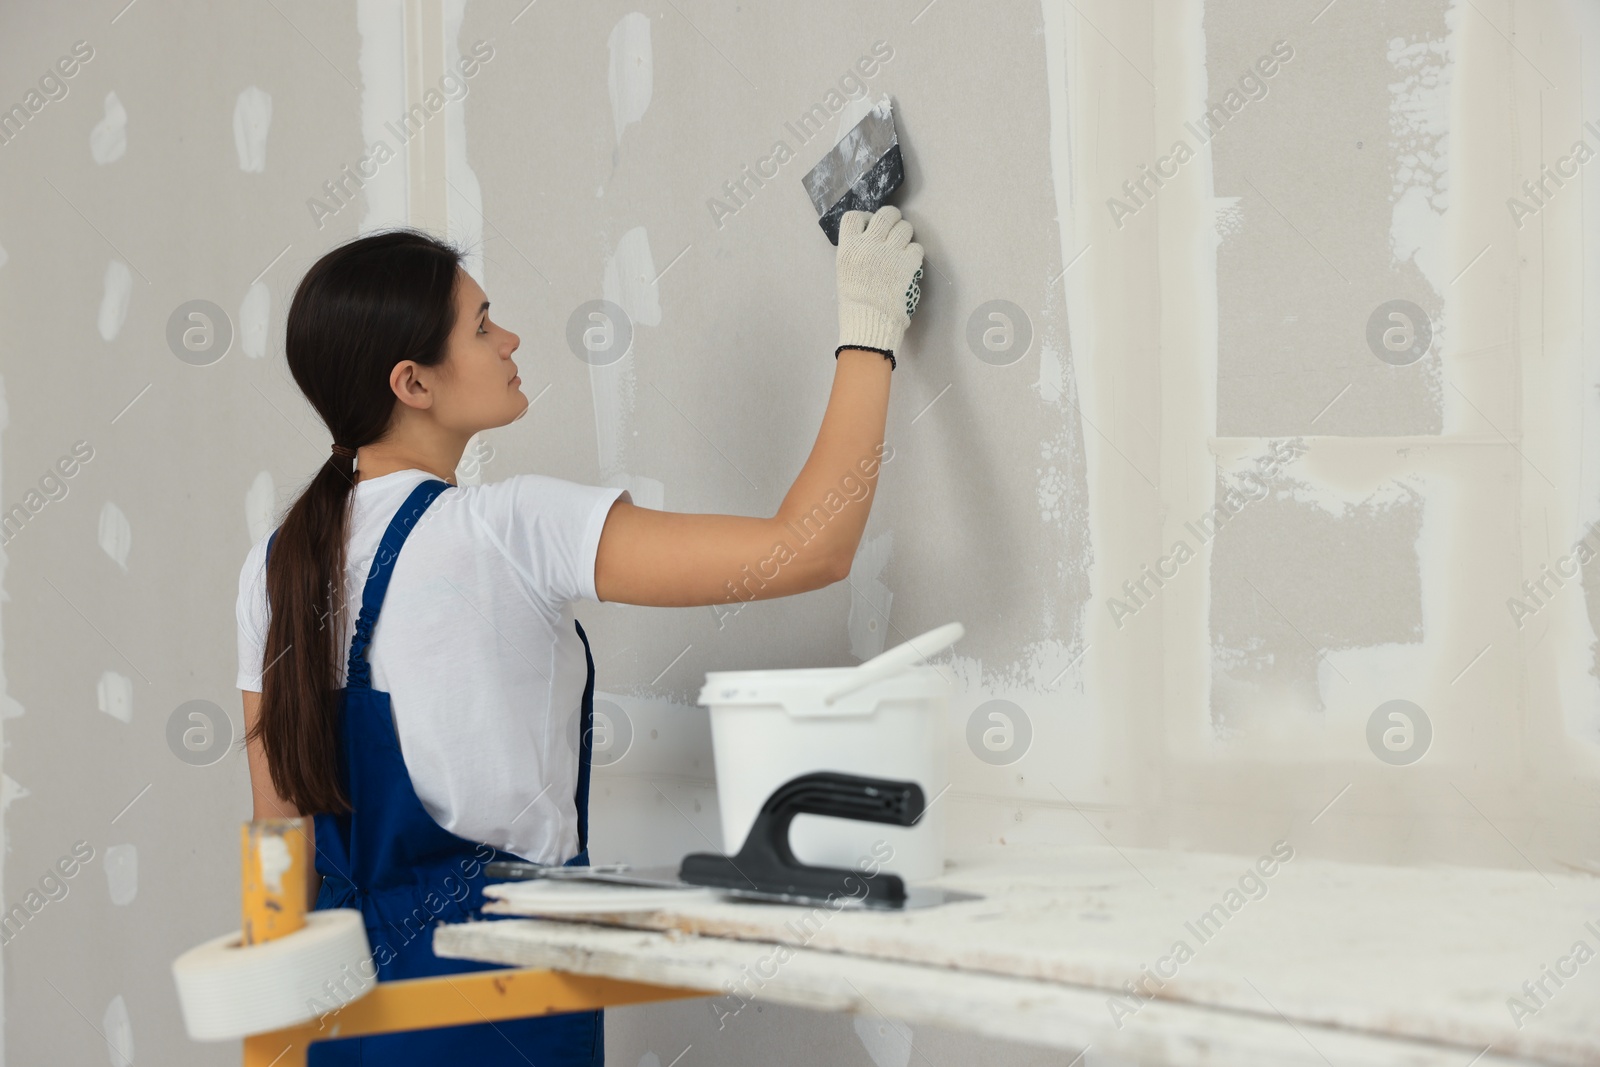 Photo of Worker plastering wall with putty knife indoors